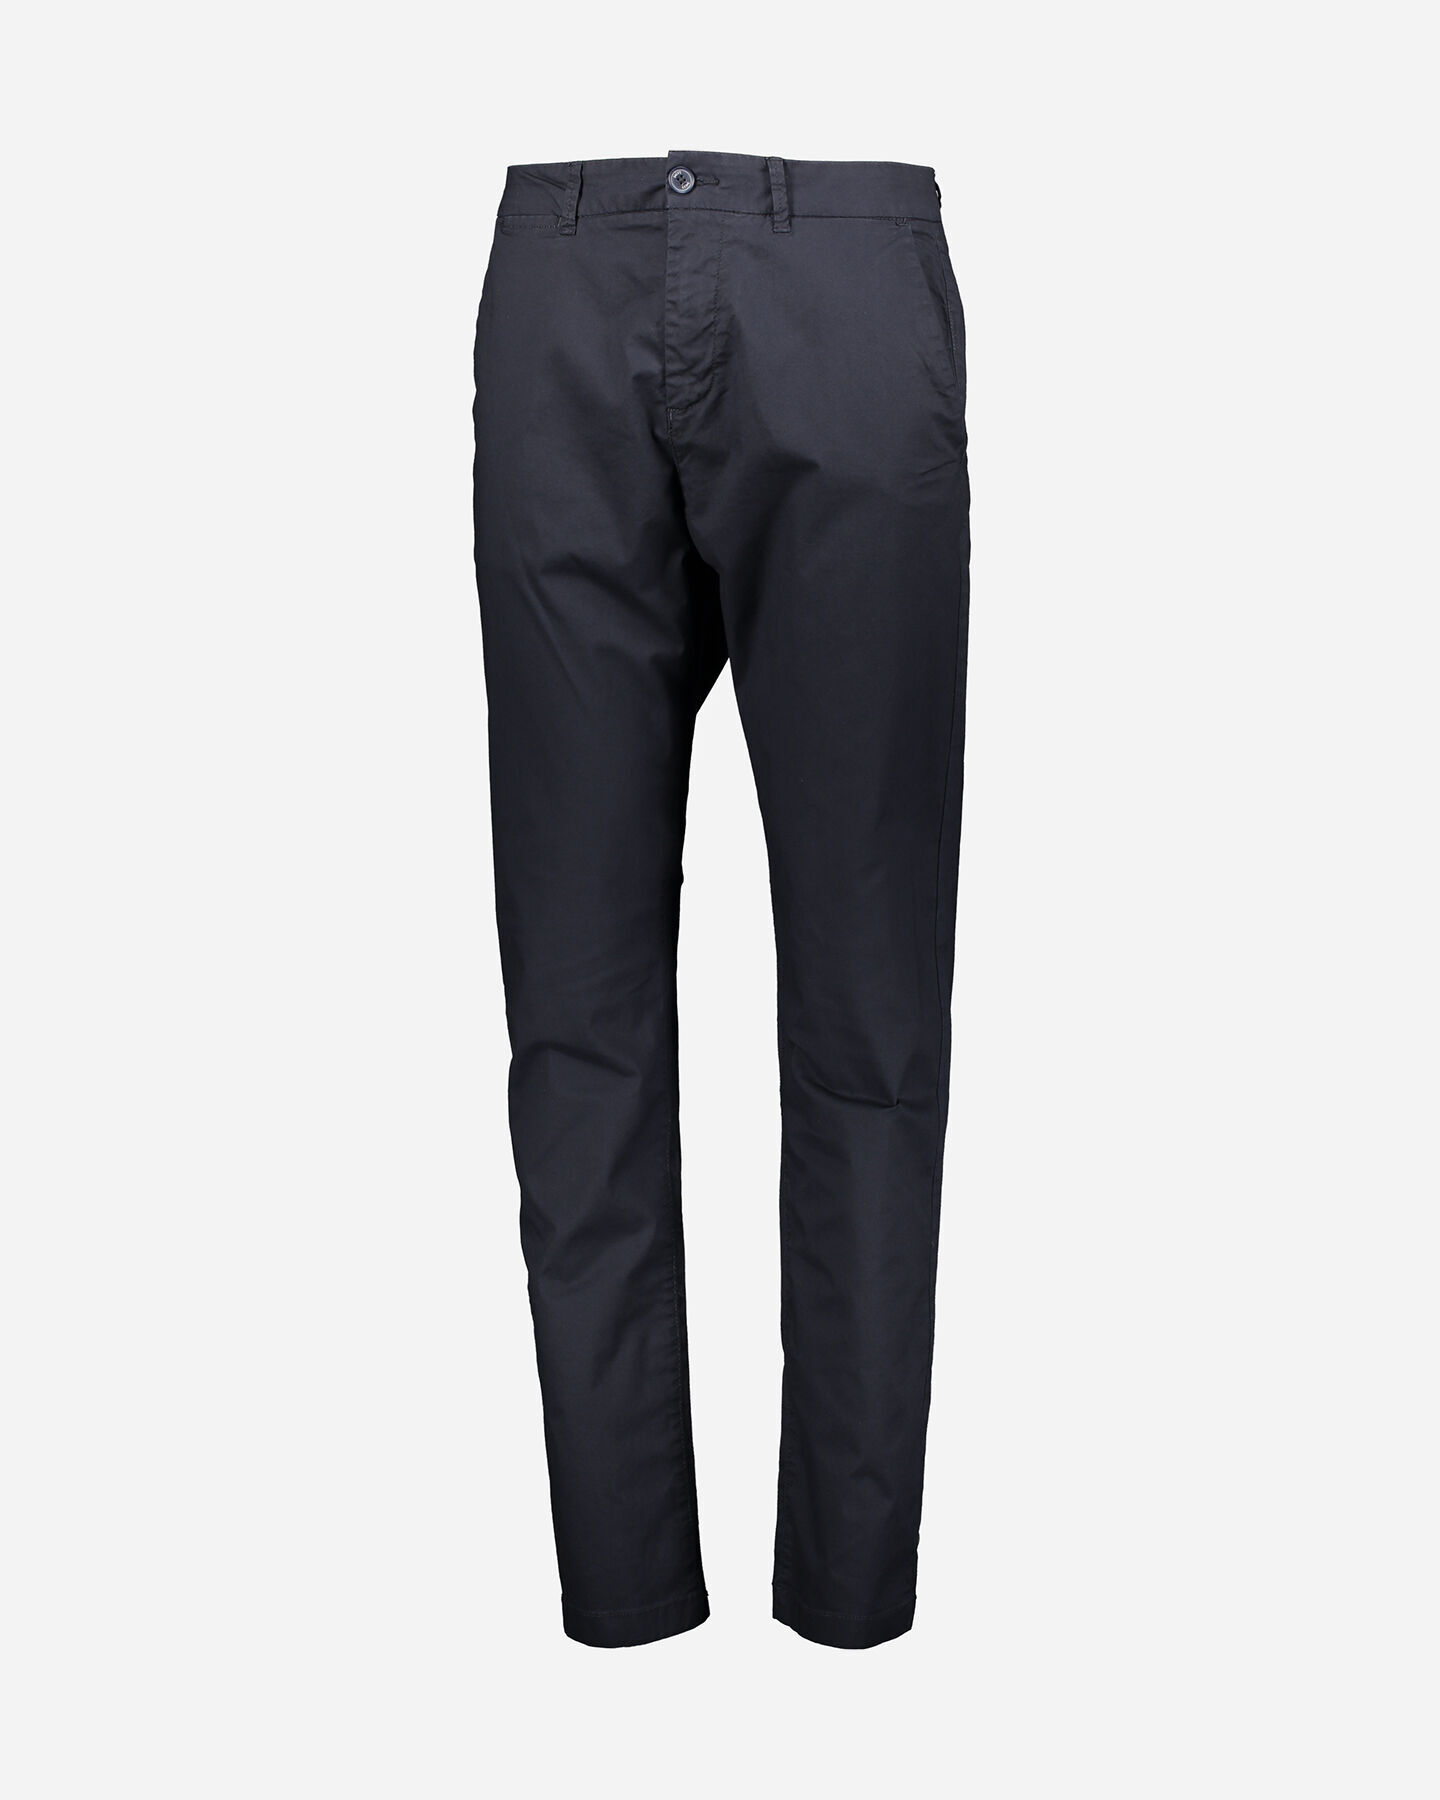  Pantalone DACK'S CHINOS M S4086863|914|44 scatto 4